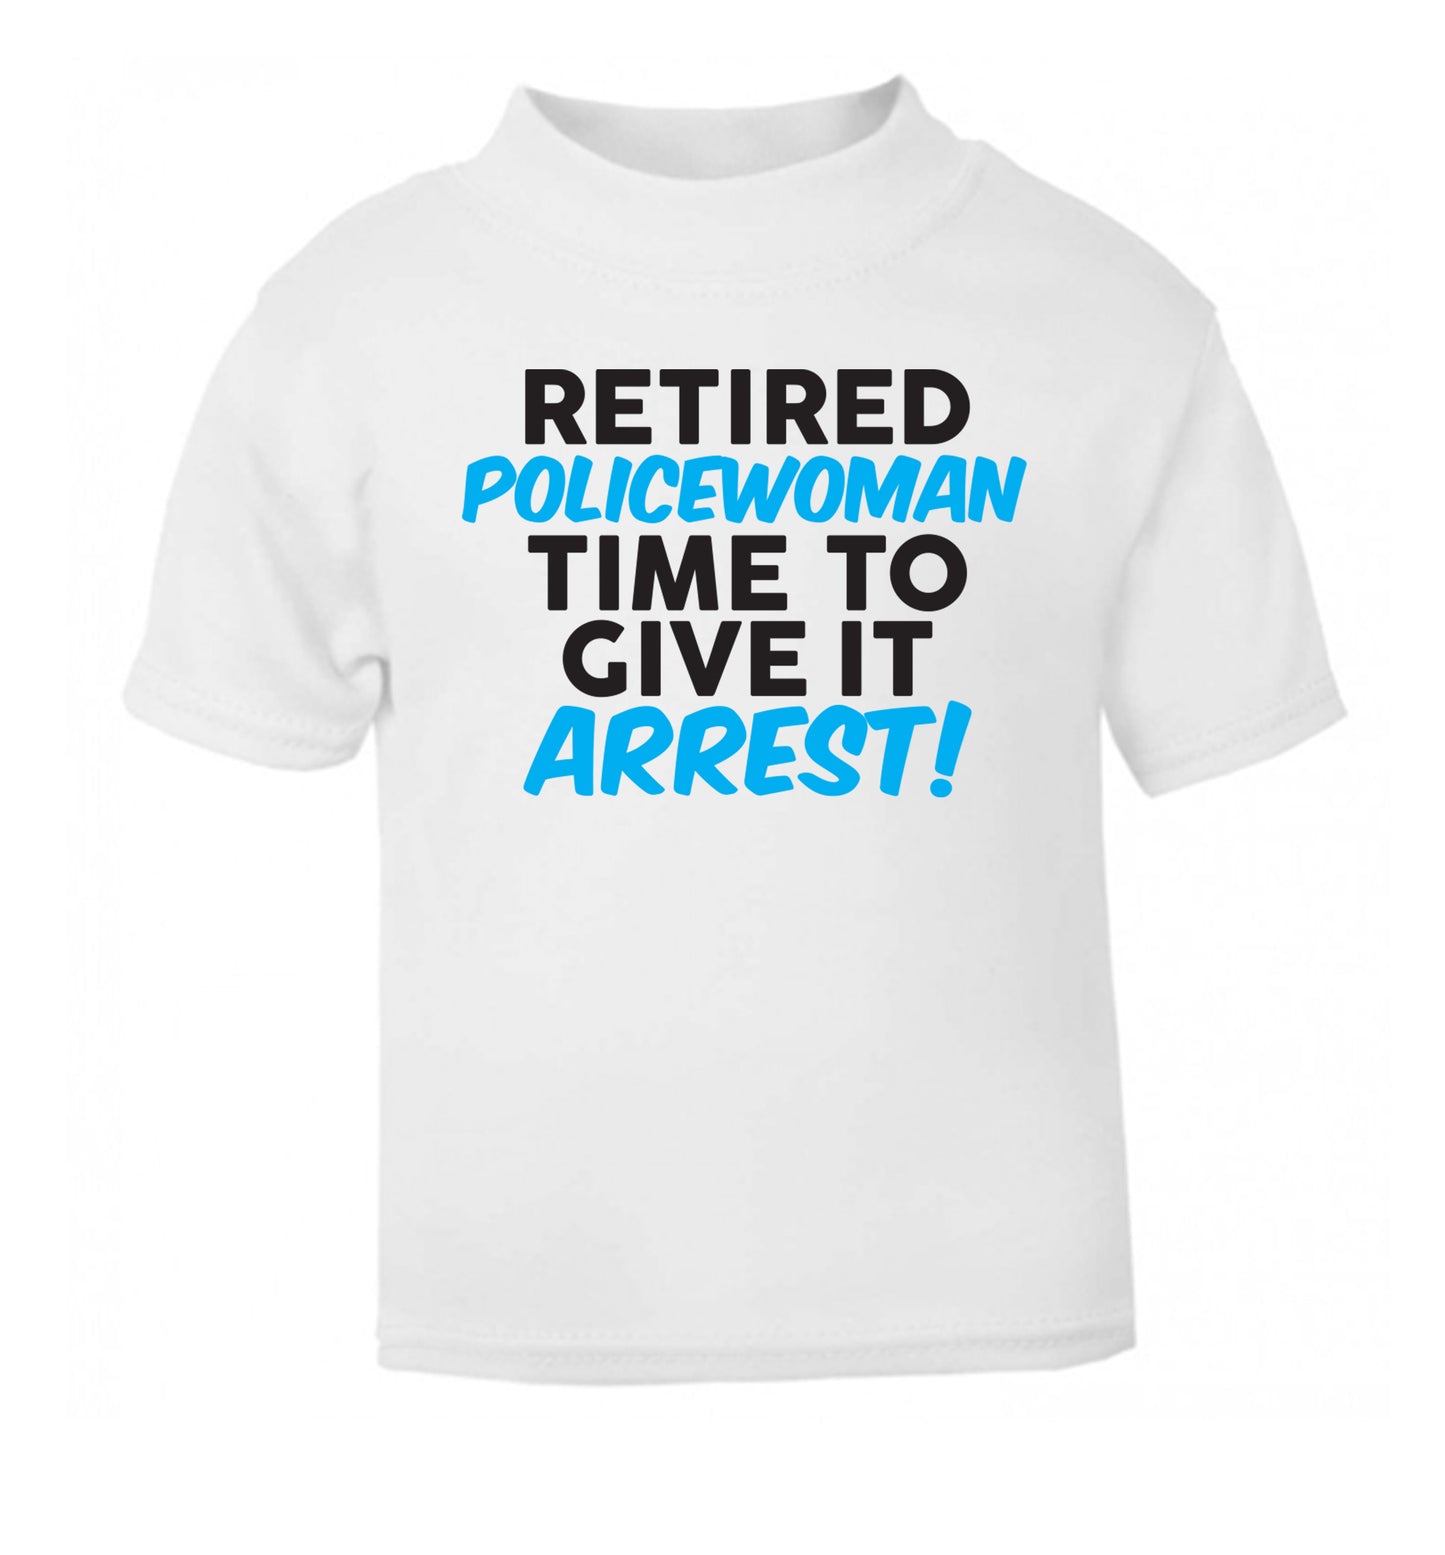 Retired policewoman time to give it arrest white Baby Toddler Tshirt 2 Years